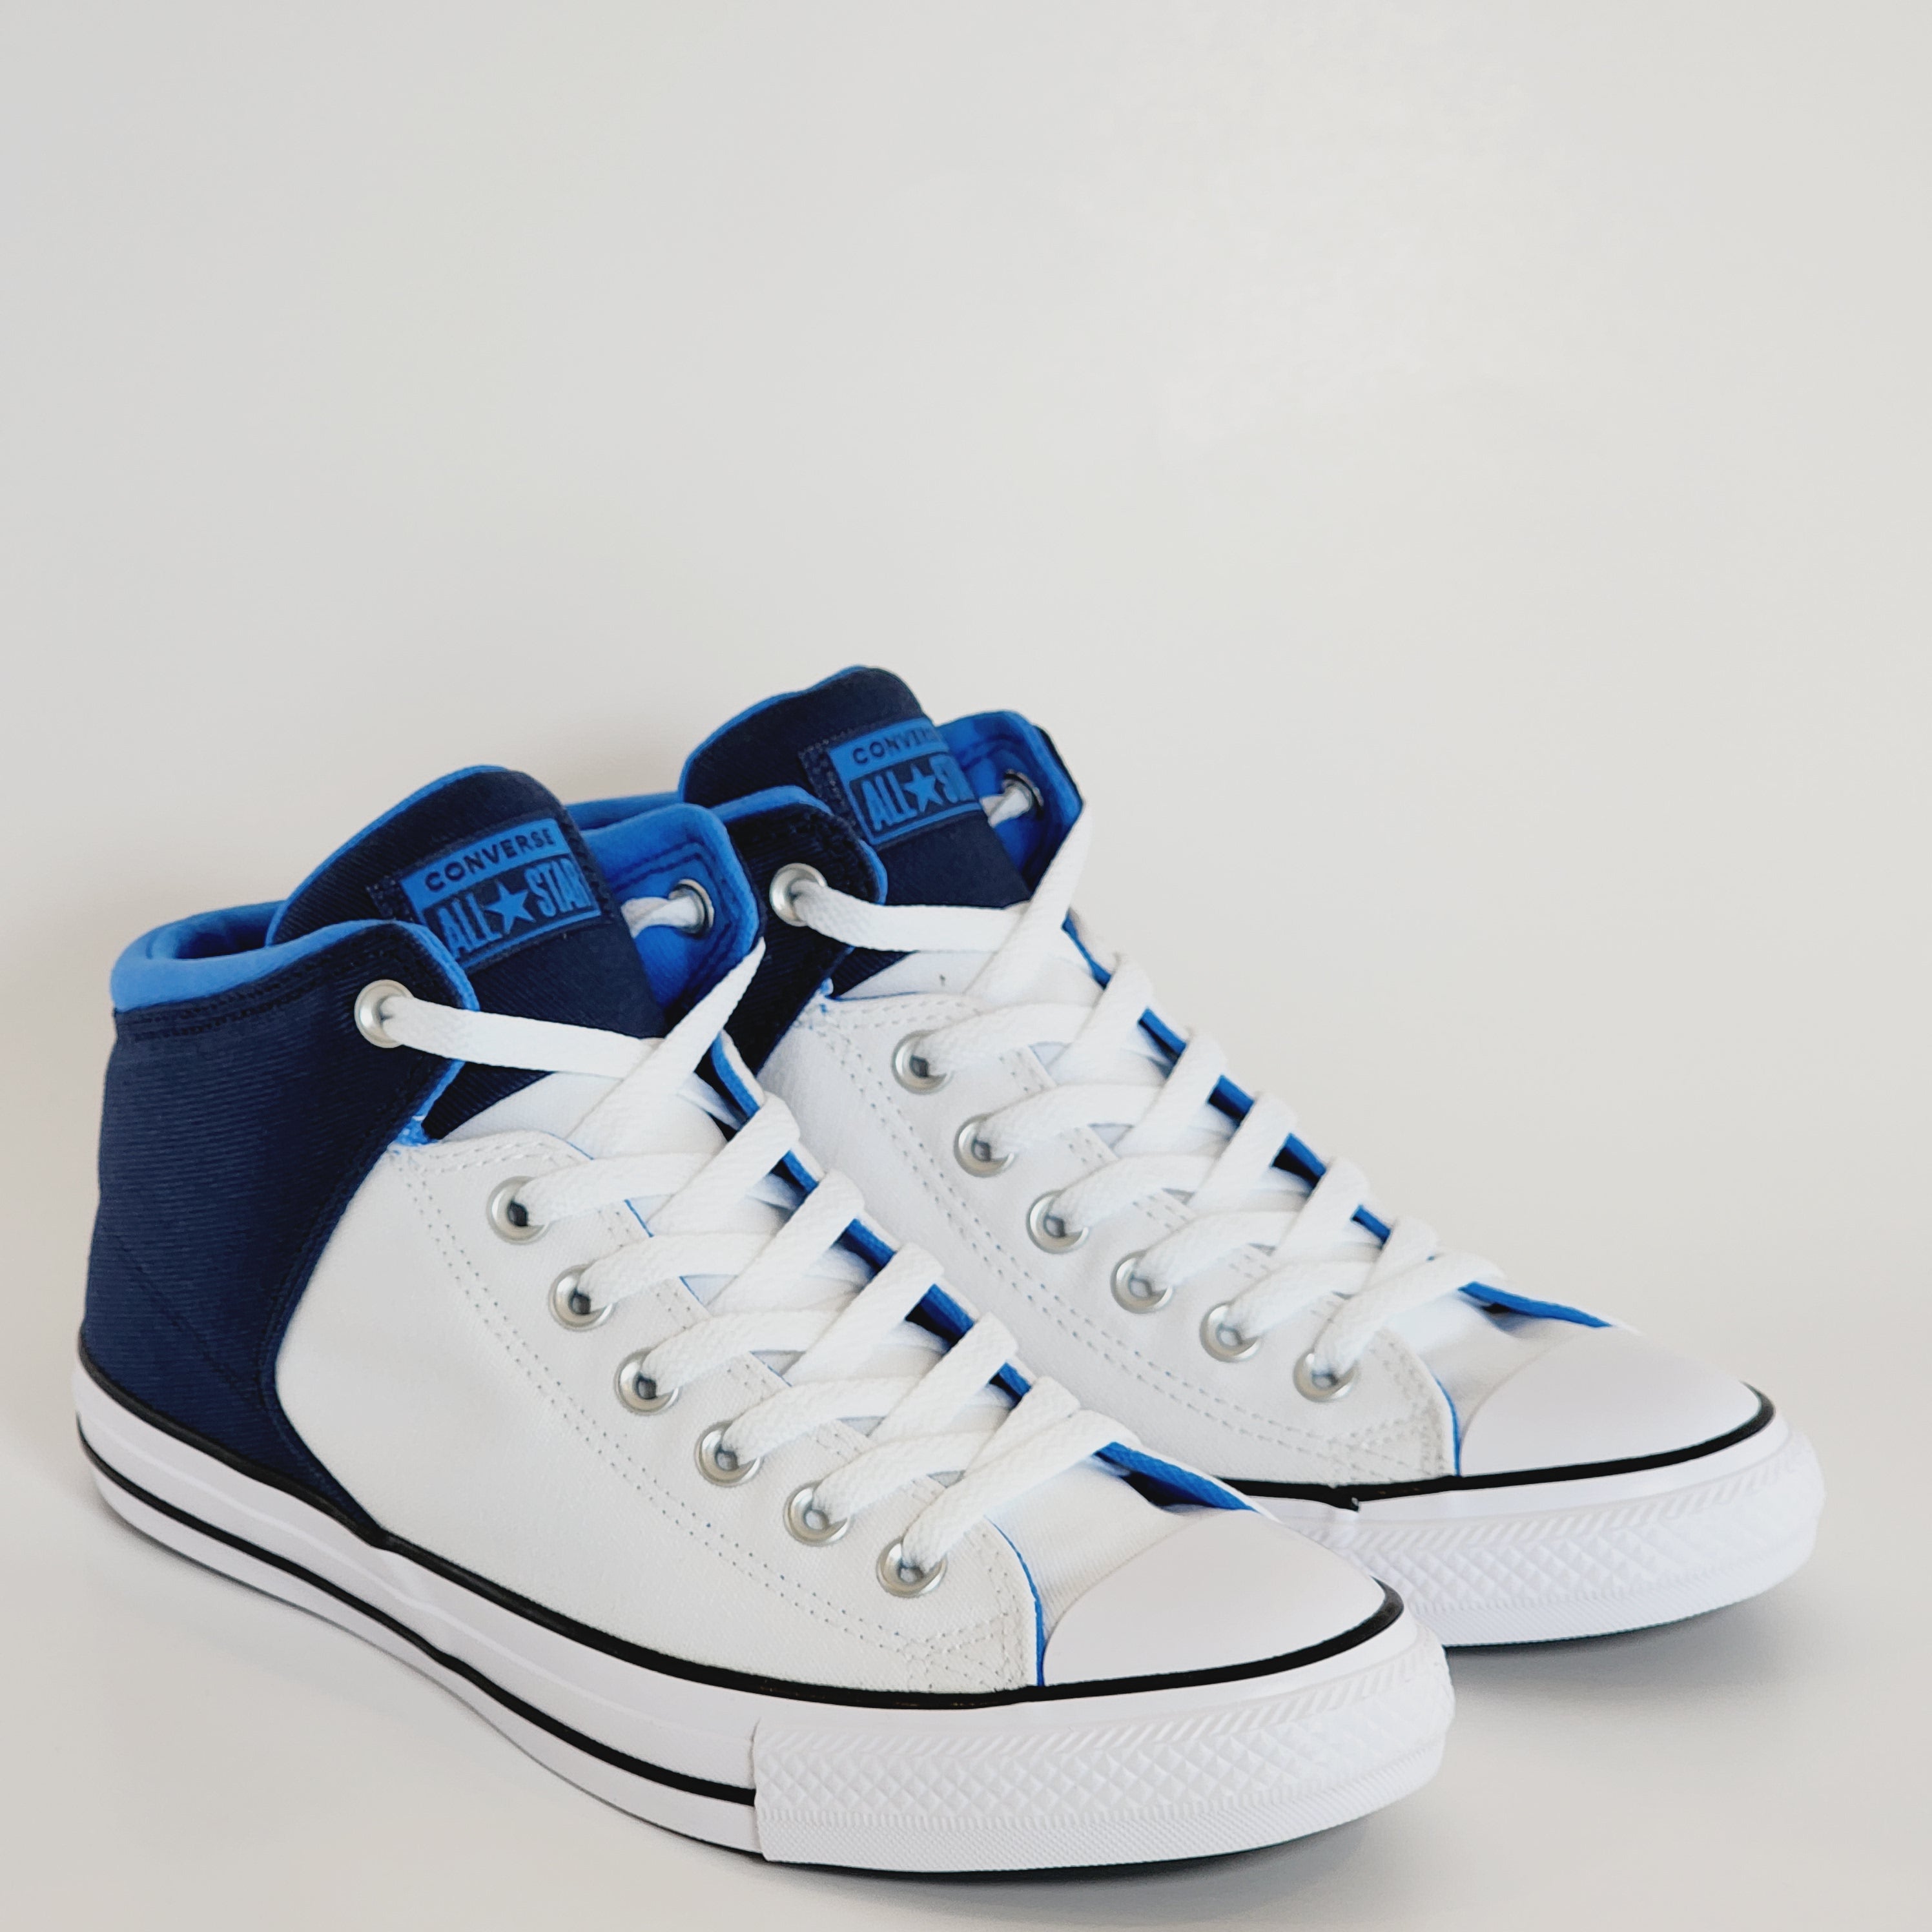 Converse CTAS Mid Malden Street Crafted White/Navy Unisex Sneakers A06591F NWT